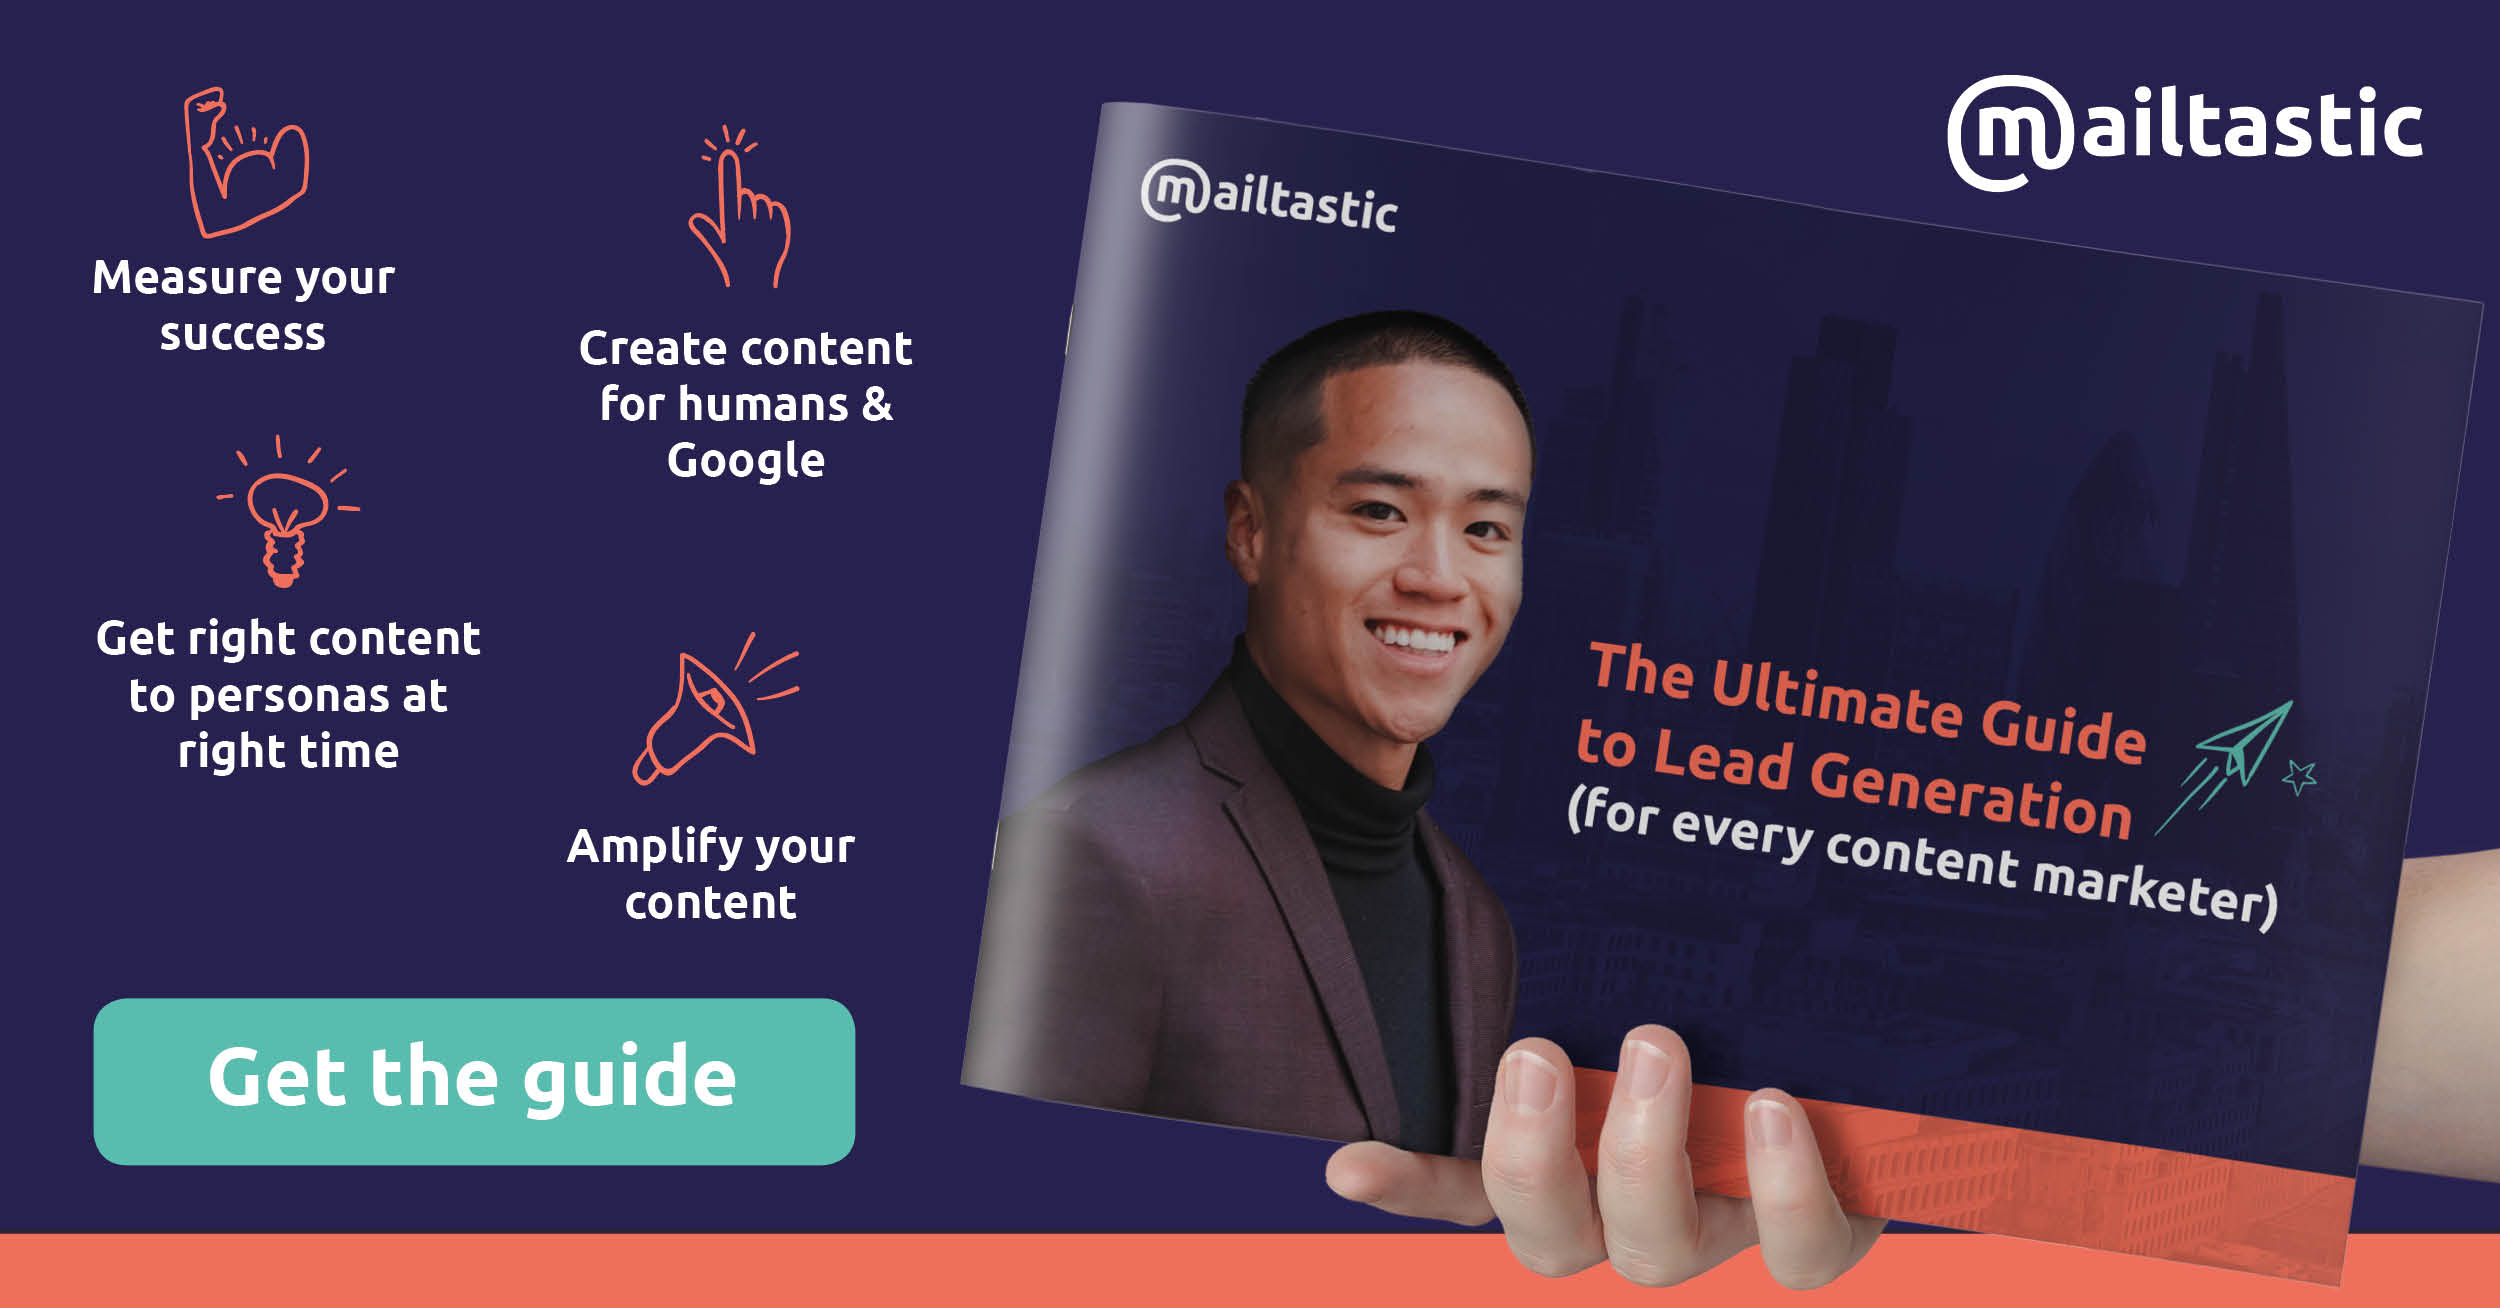 The Ultimate Guide to Lead Generation_BANNERS-1